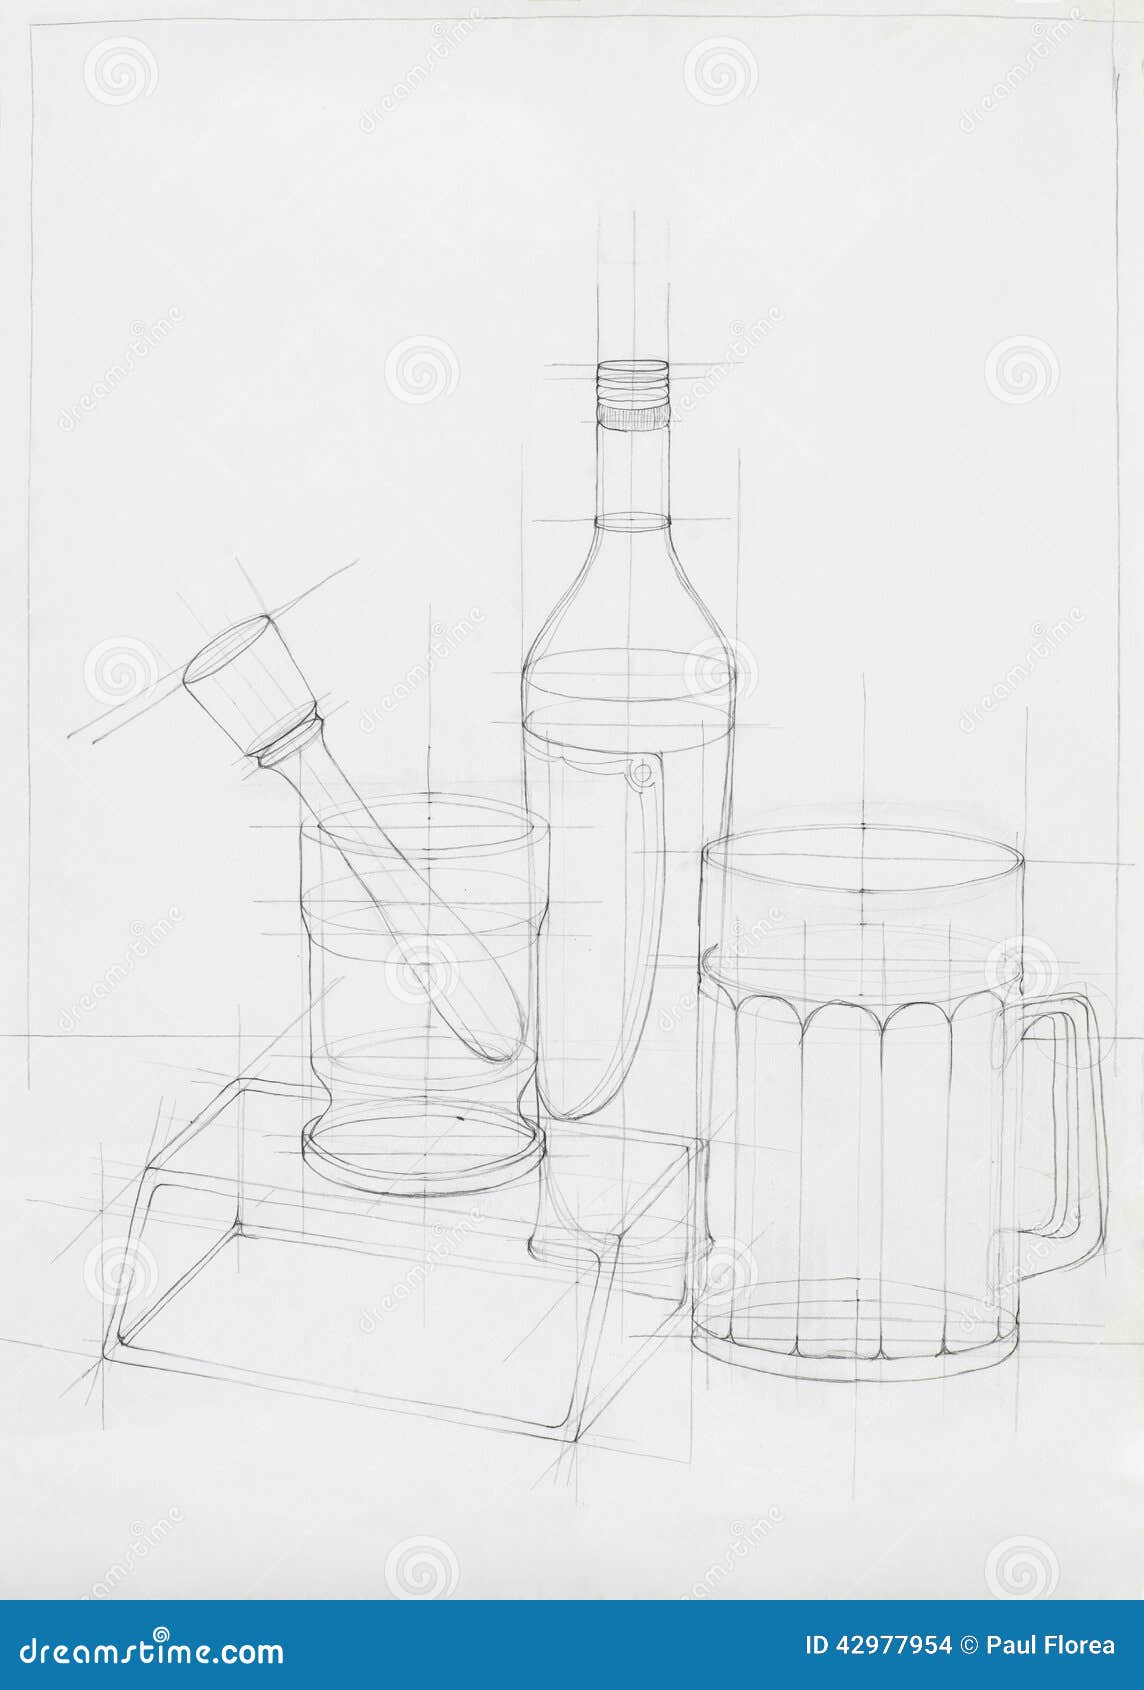 Share 150+ still life composition sketches latest